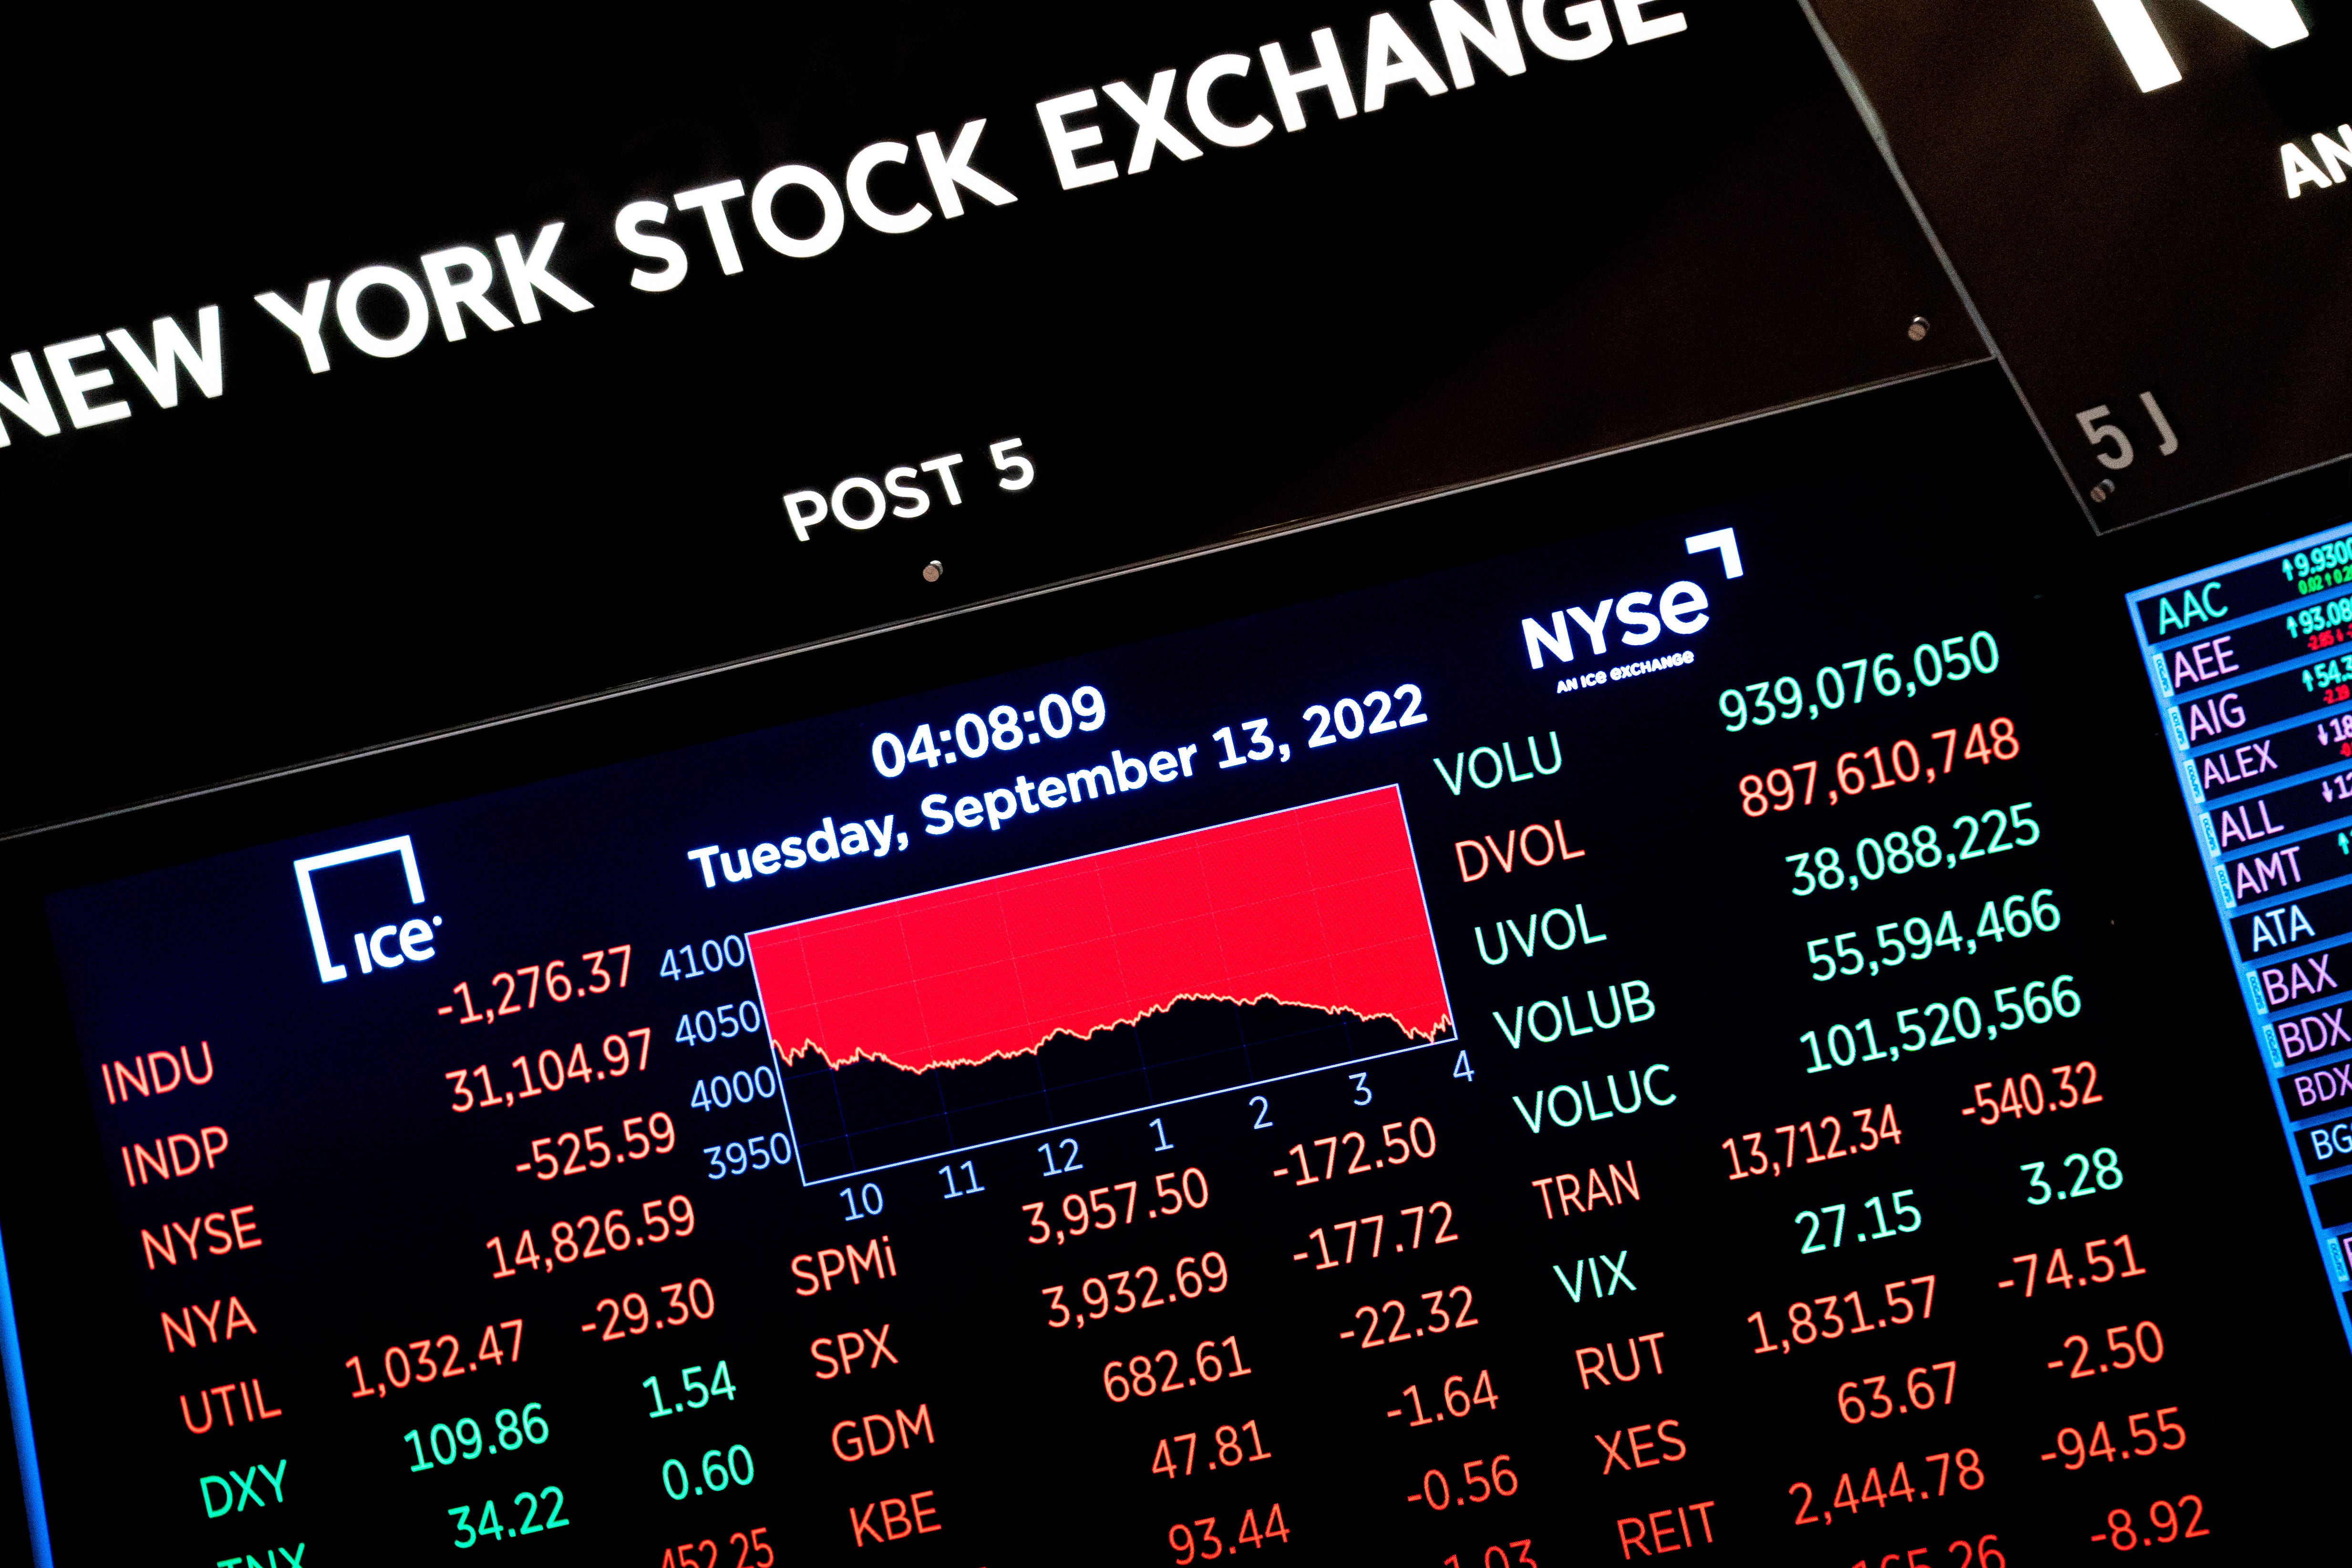 Trading restored after dozens of stocks were halted on New York Stock Exchange after opening bell